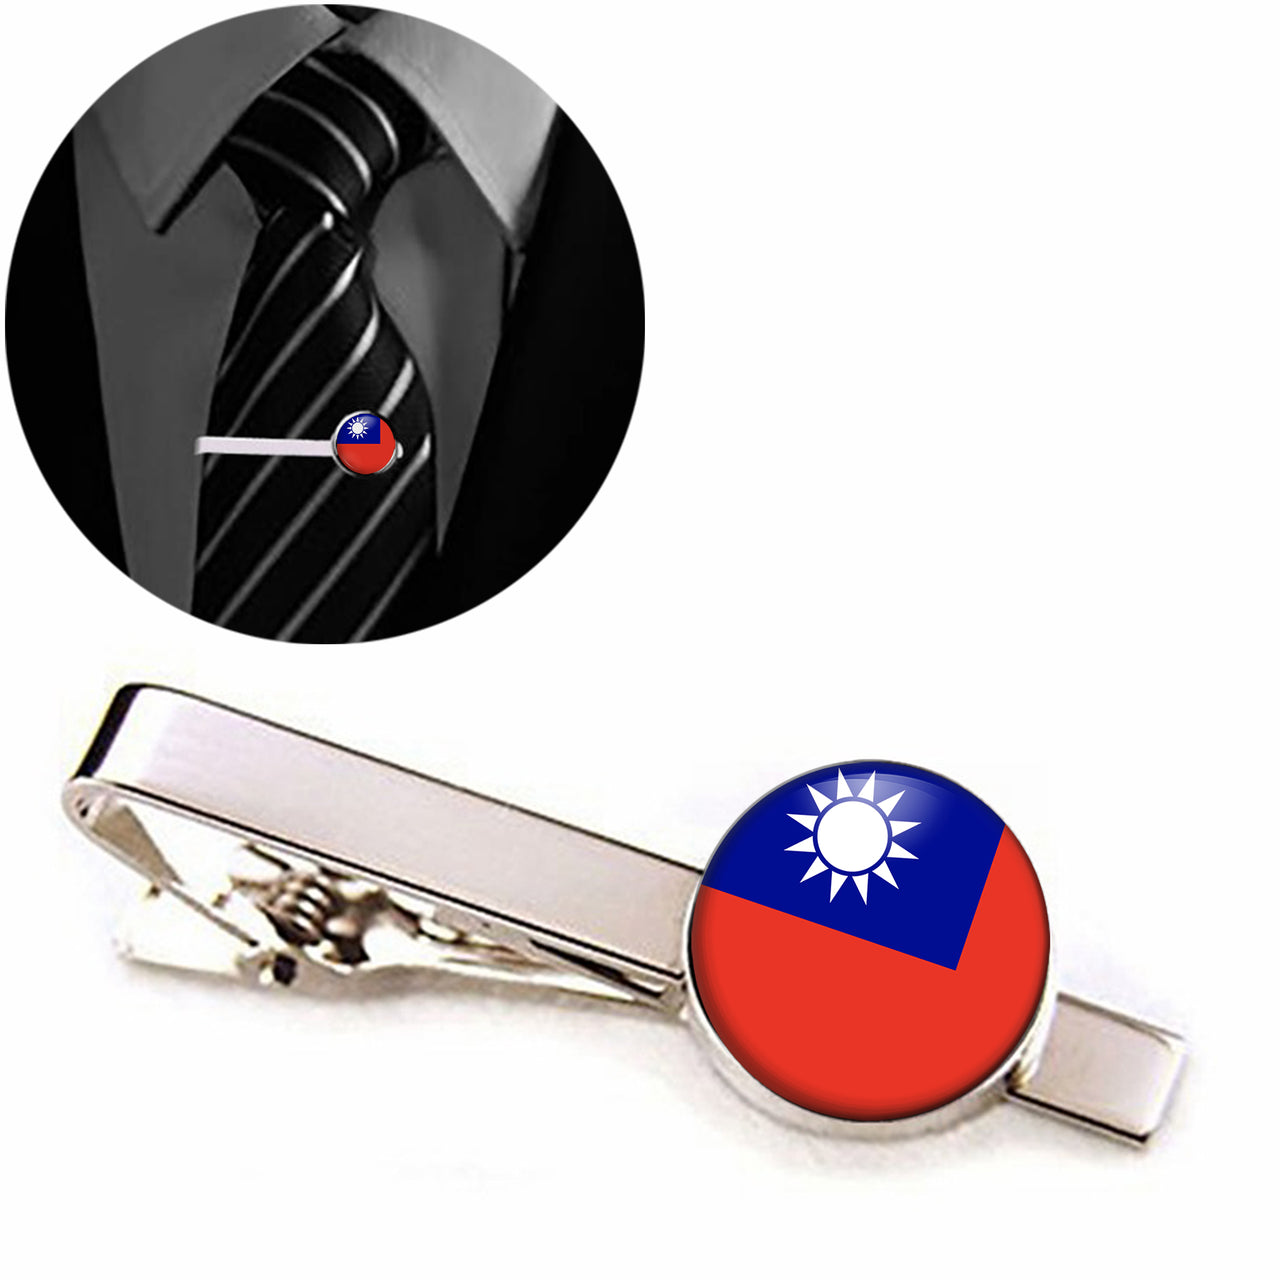 Taiwan Flag Designed Tie Clips